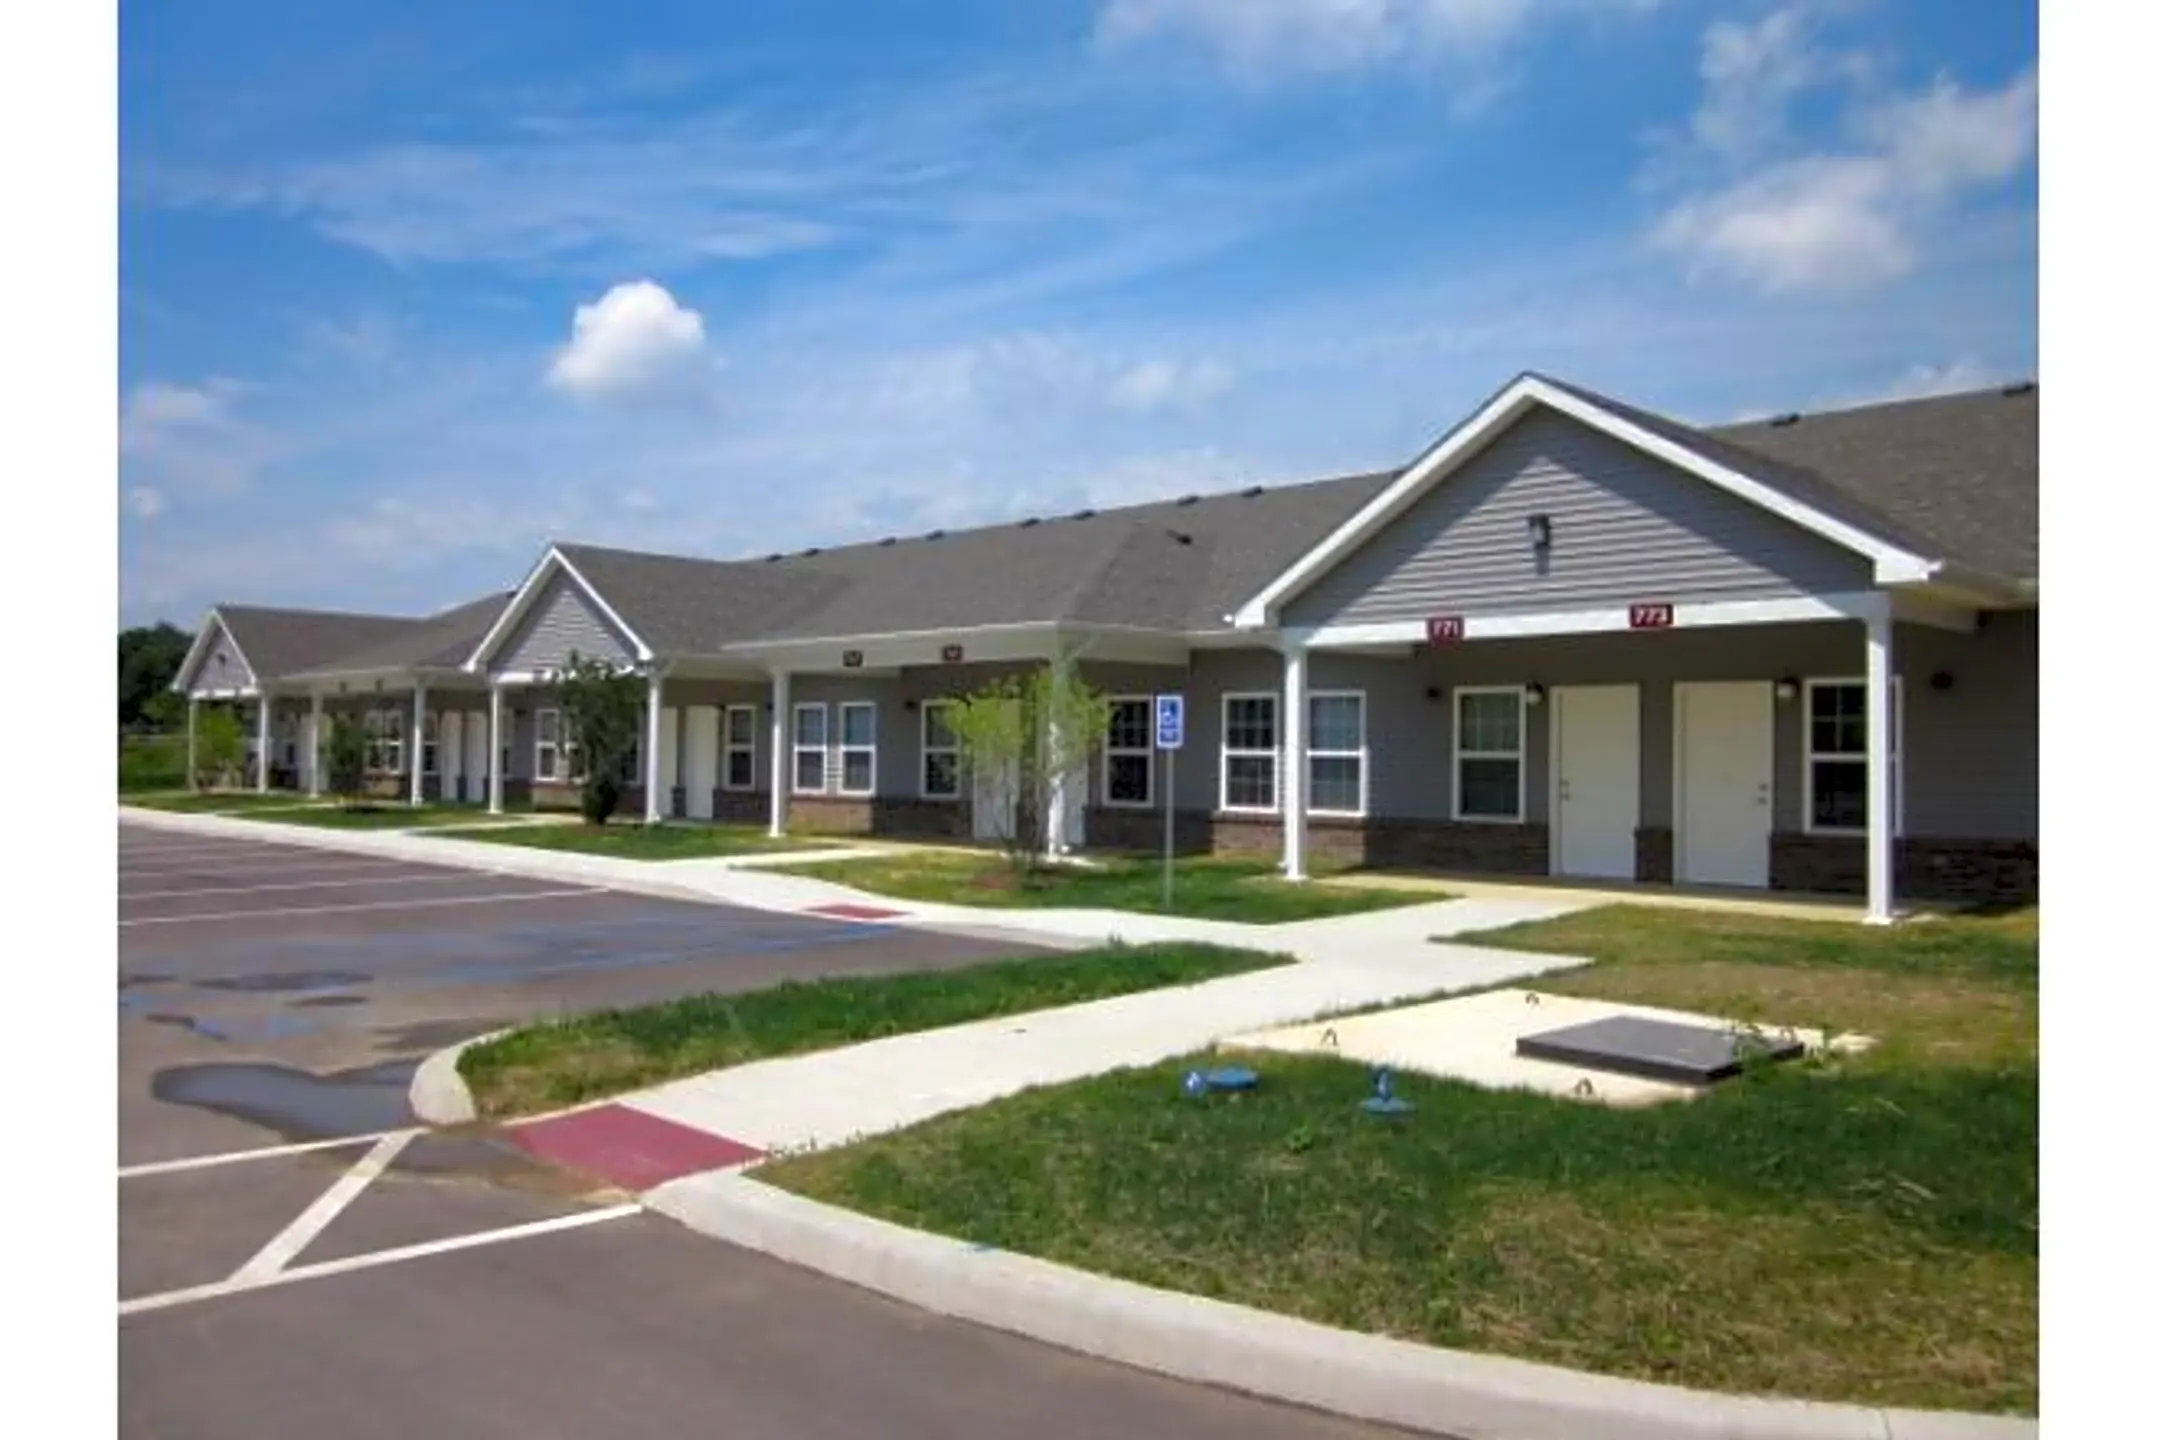 Building - Willow Park at Beyer Farm Apartments - Warsaw, IN